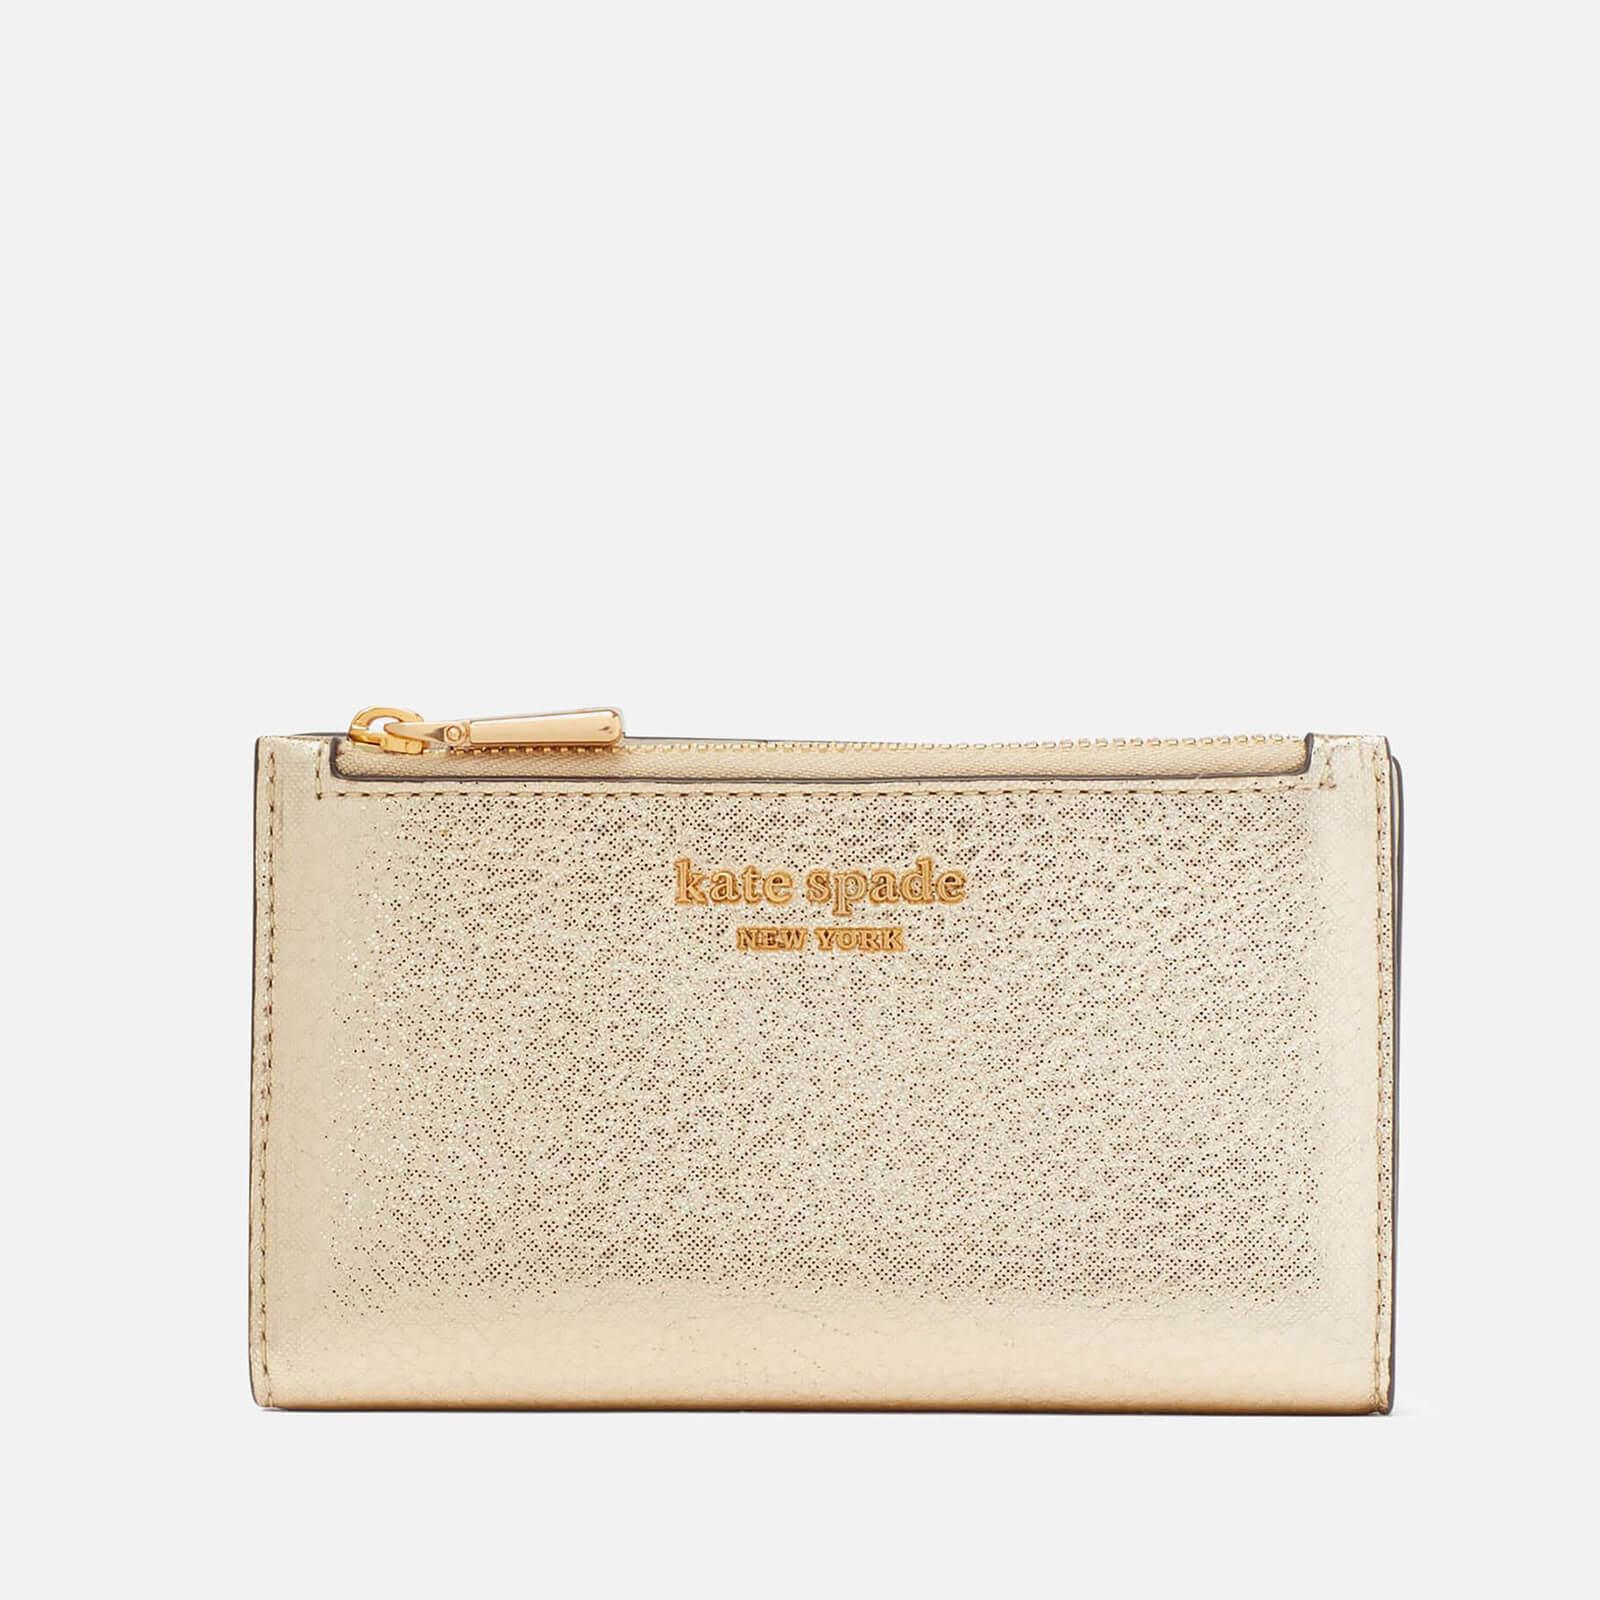 Kate Spade Morgan Saffiano Leather Wallet in Natural | Lyst